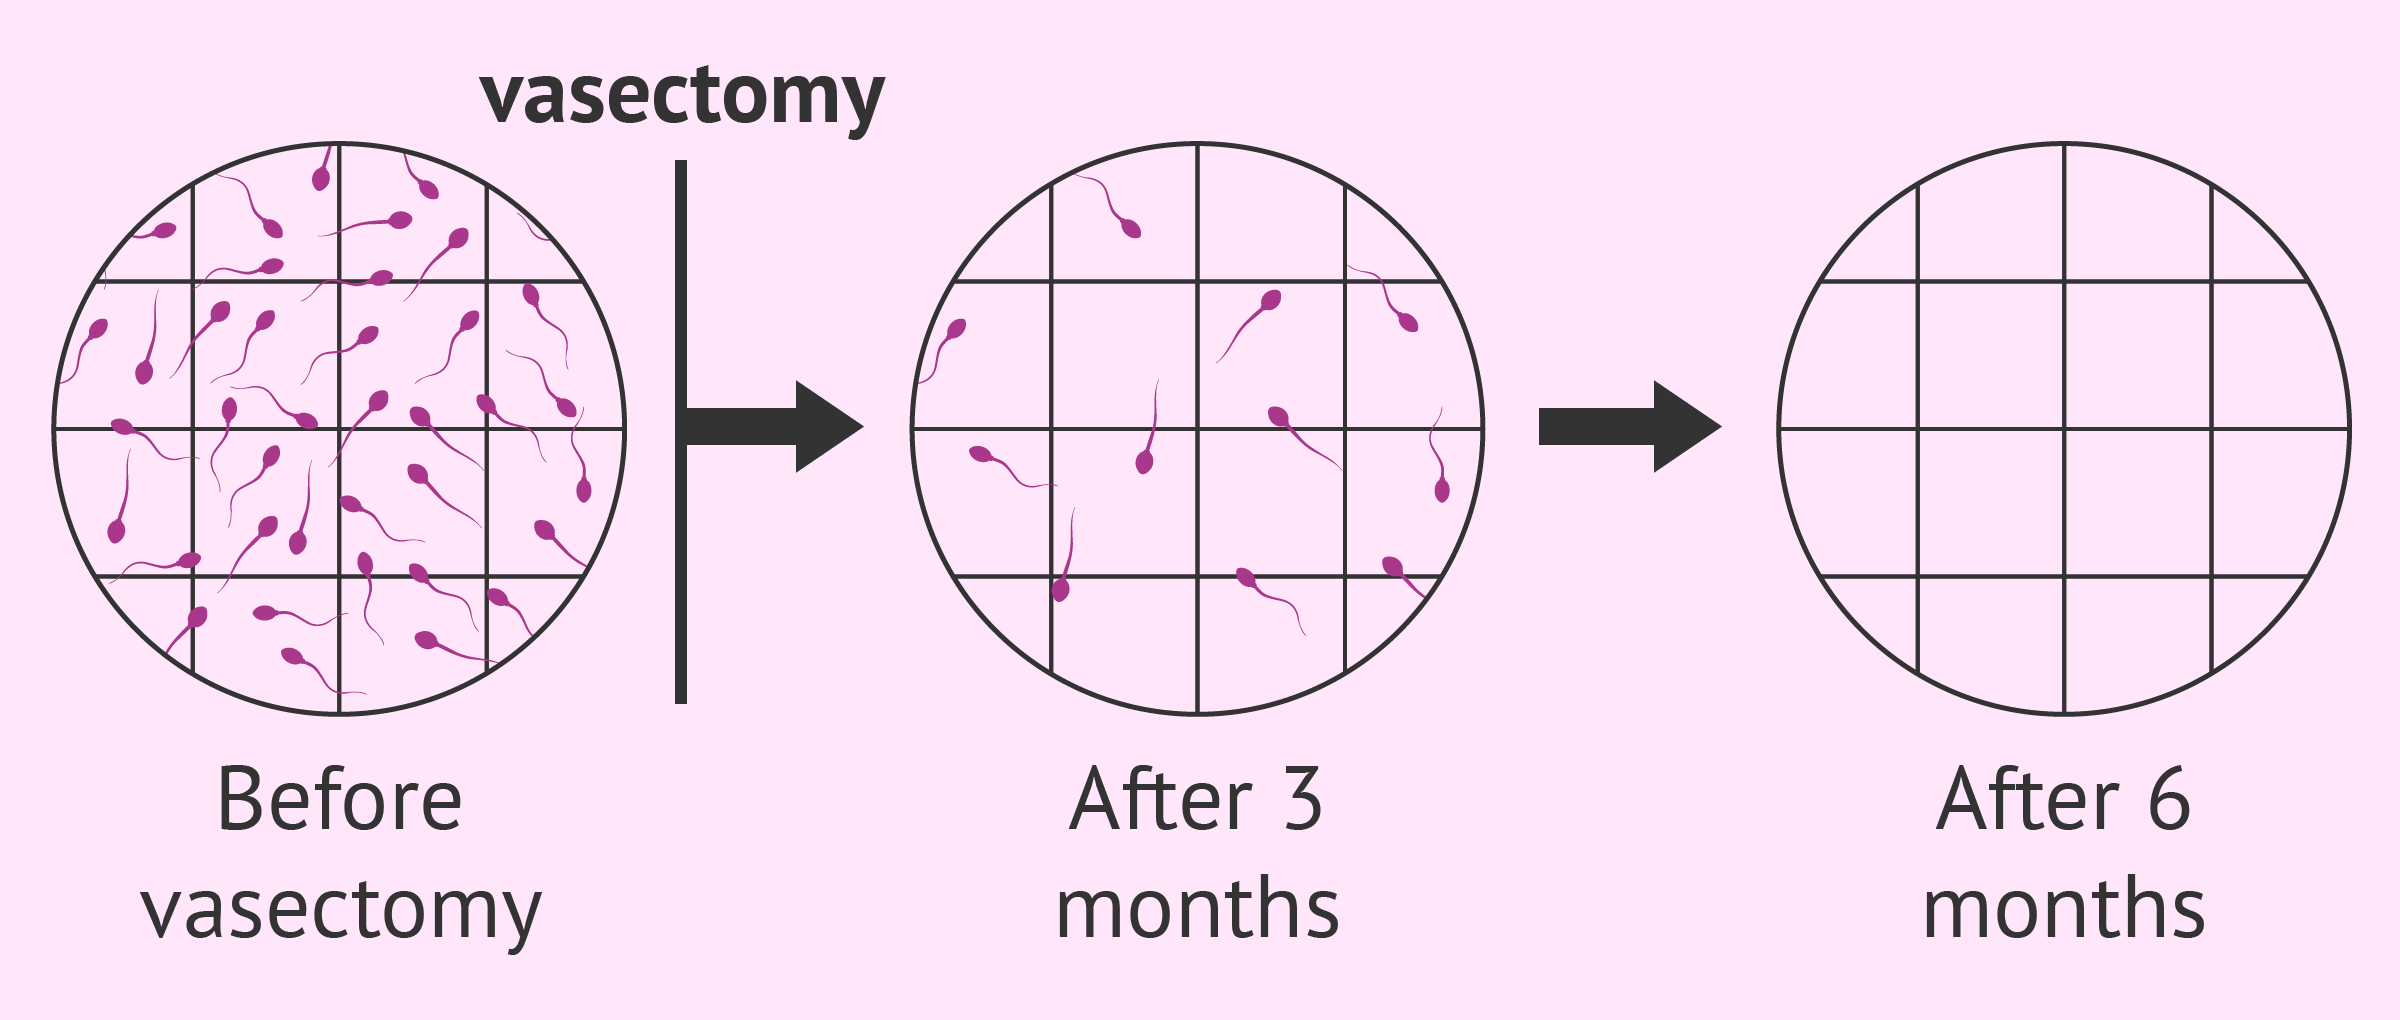 best of Viability vasectomy Sperm after